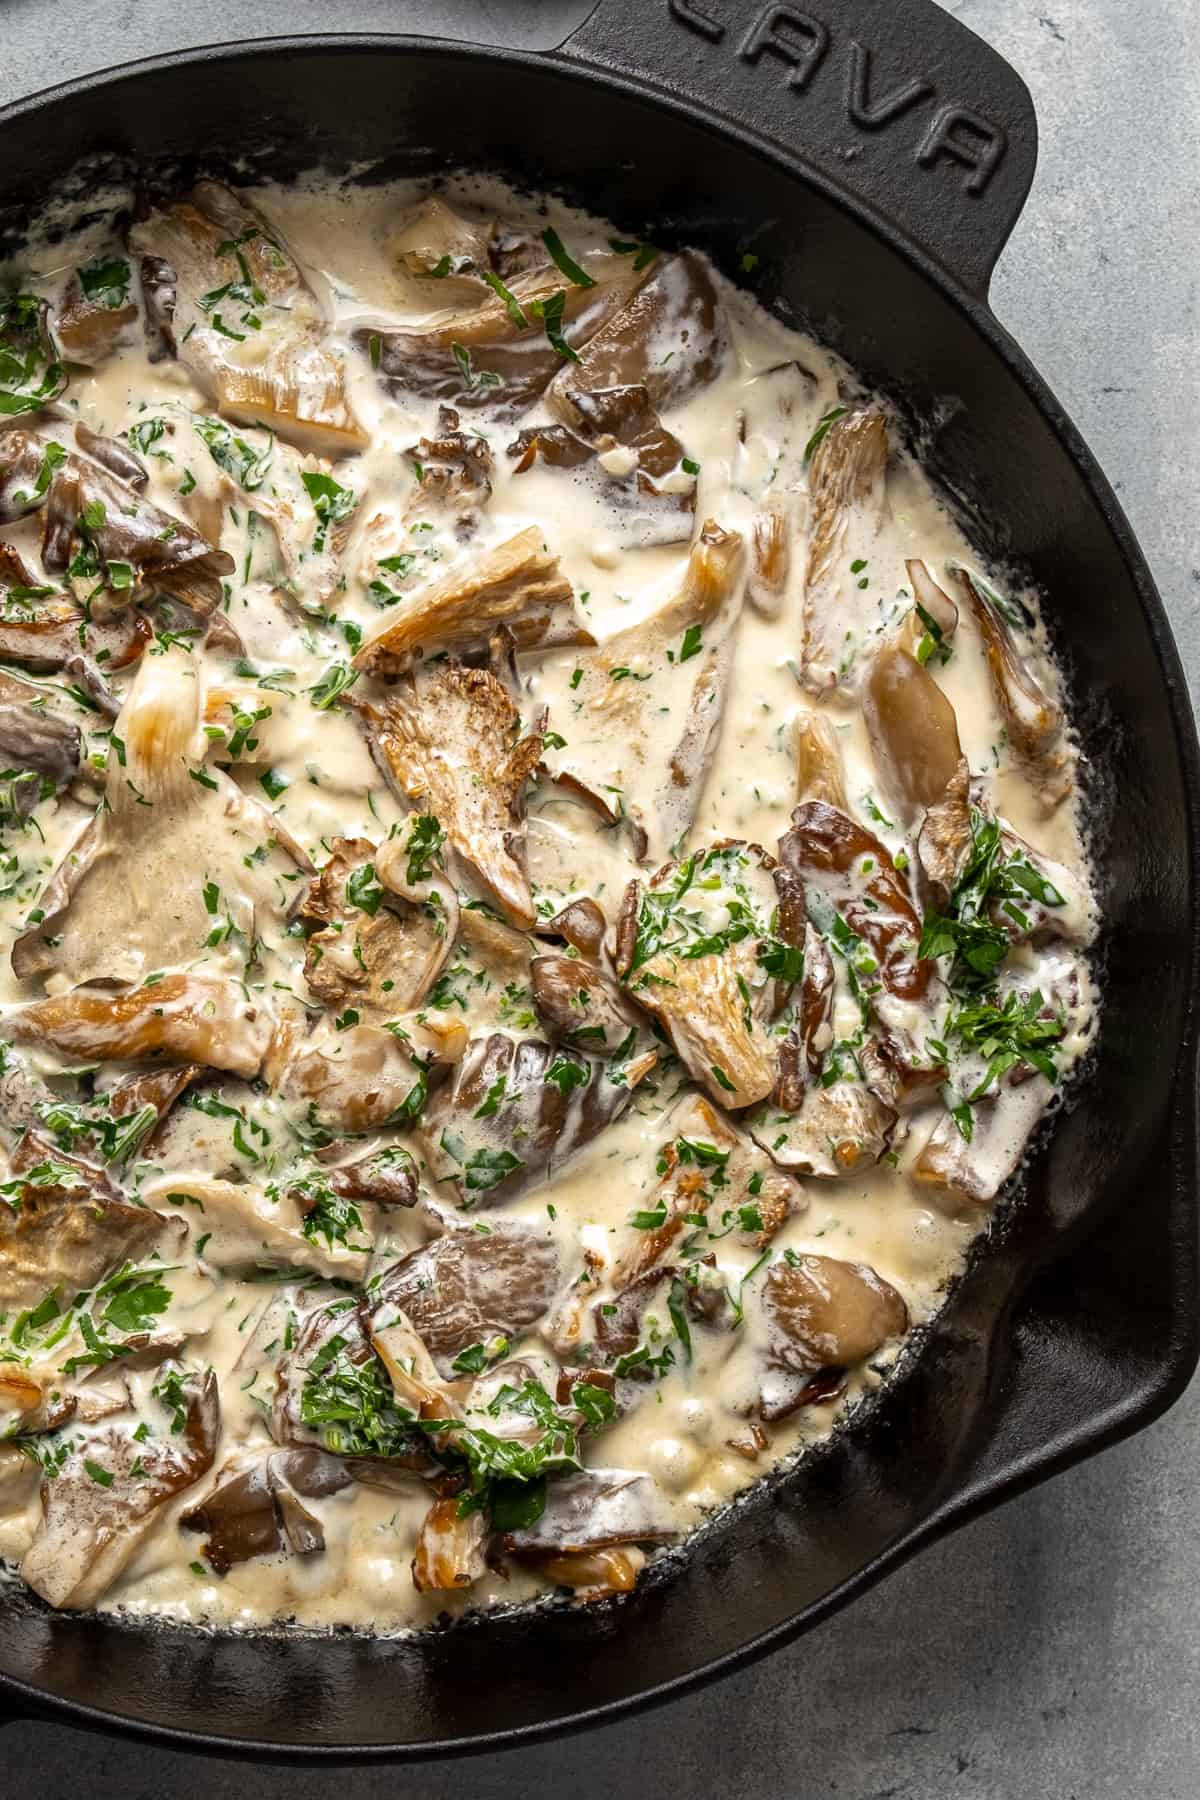 Creamy oyster mushroom sauce with parsley in a cast iron skillet.